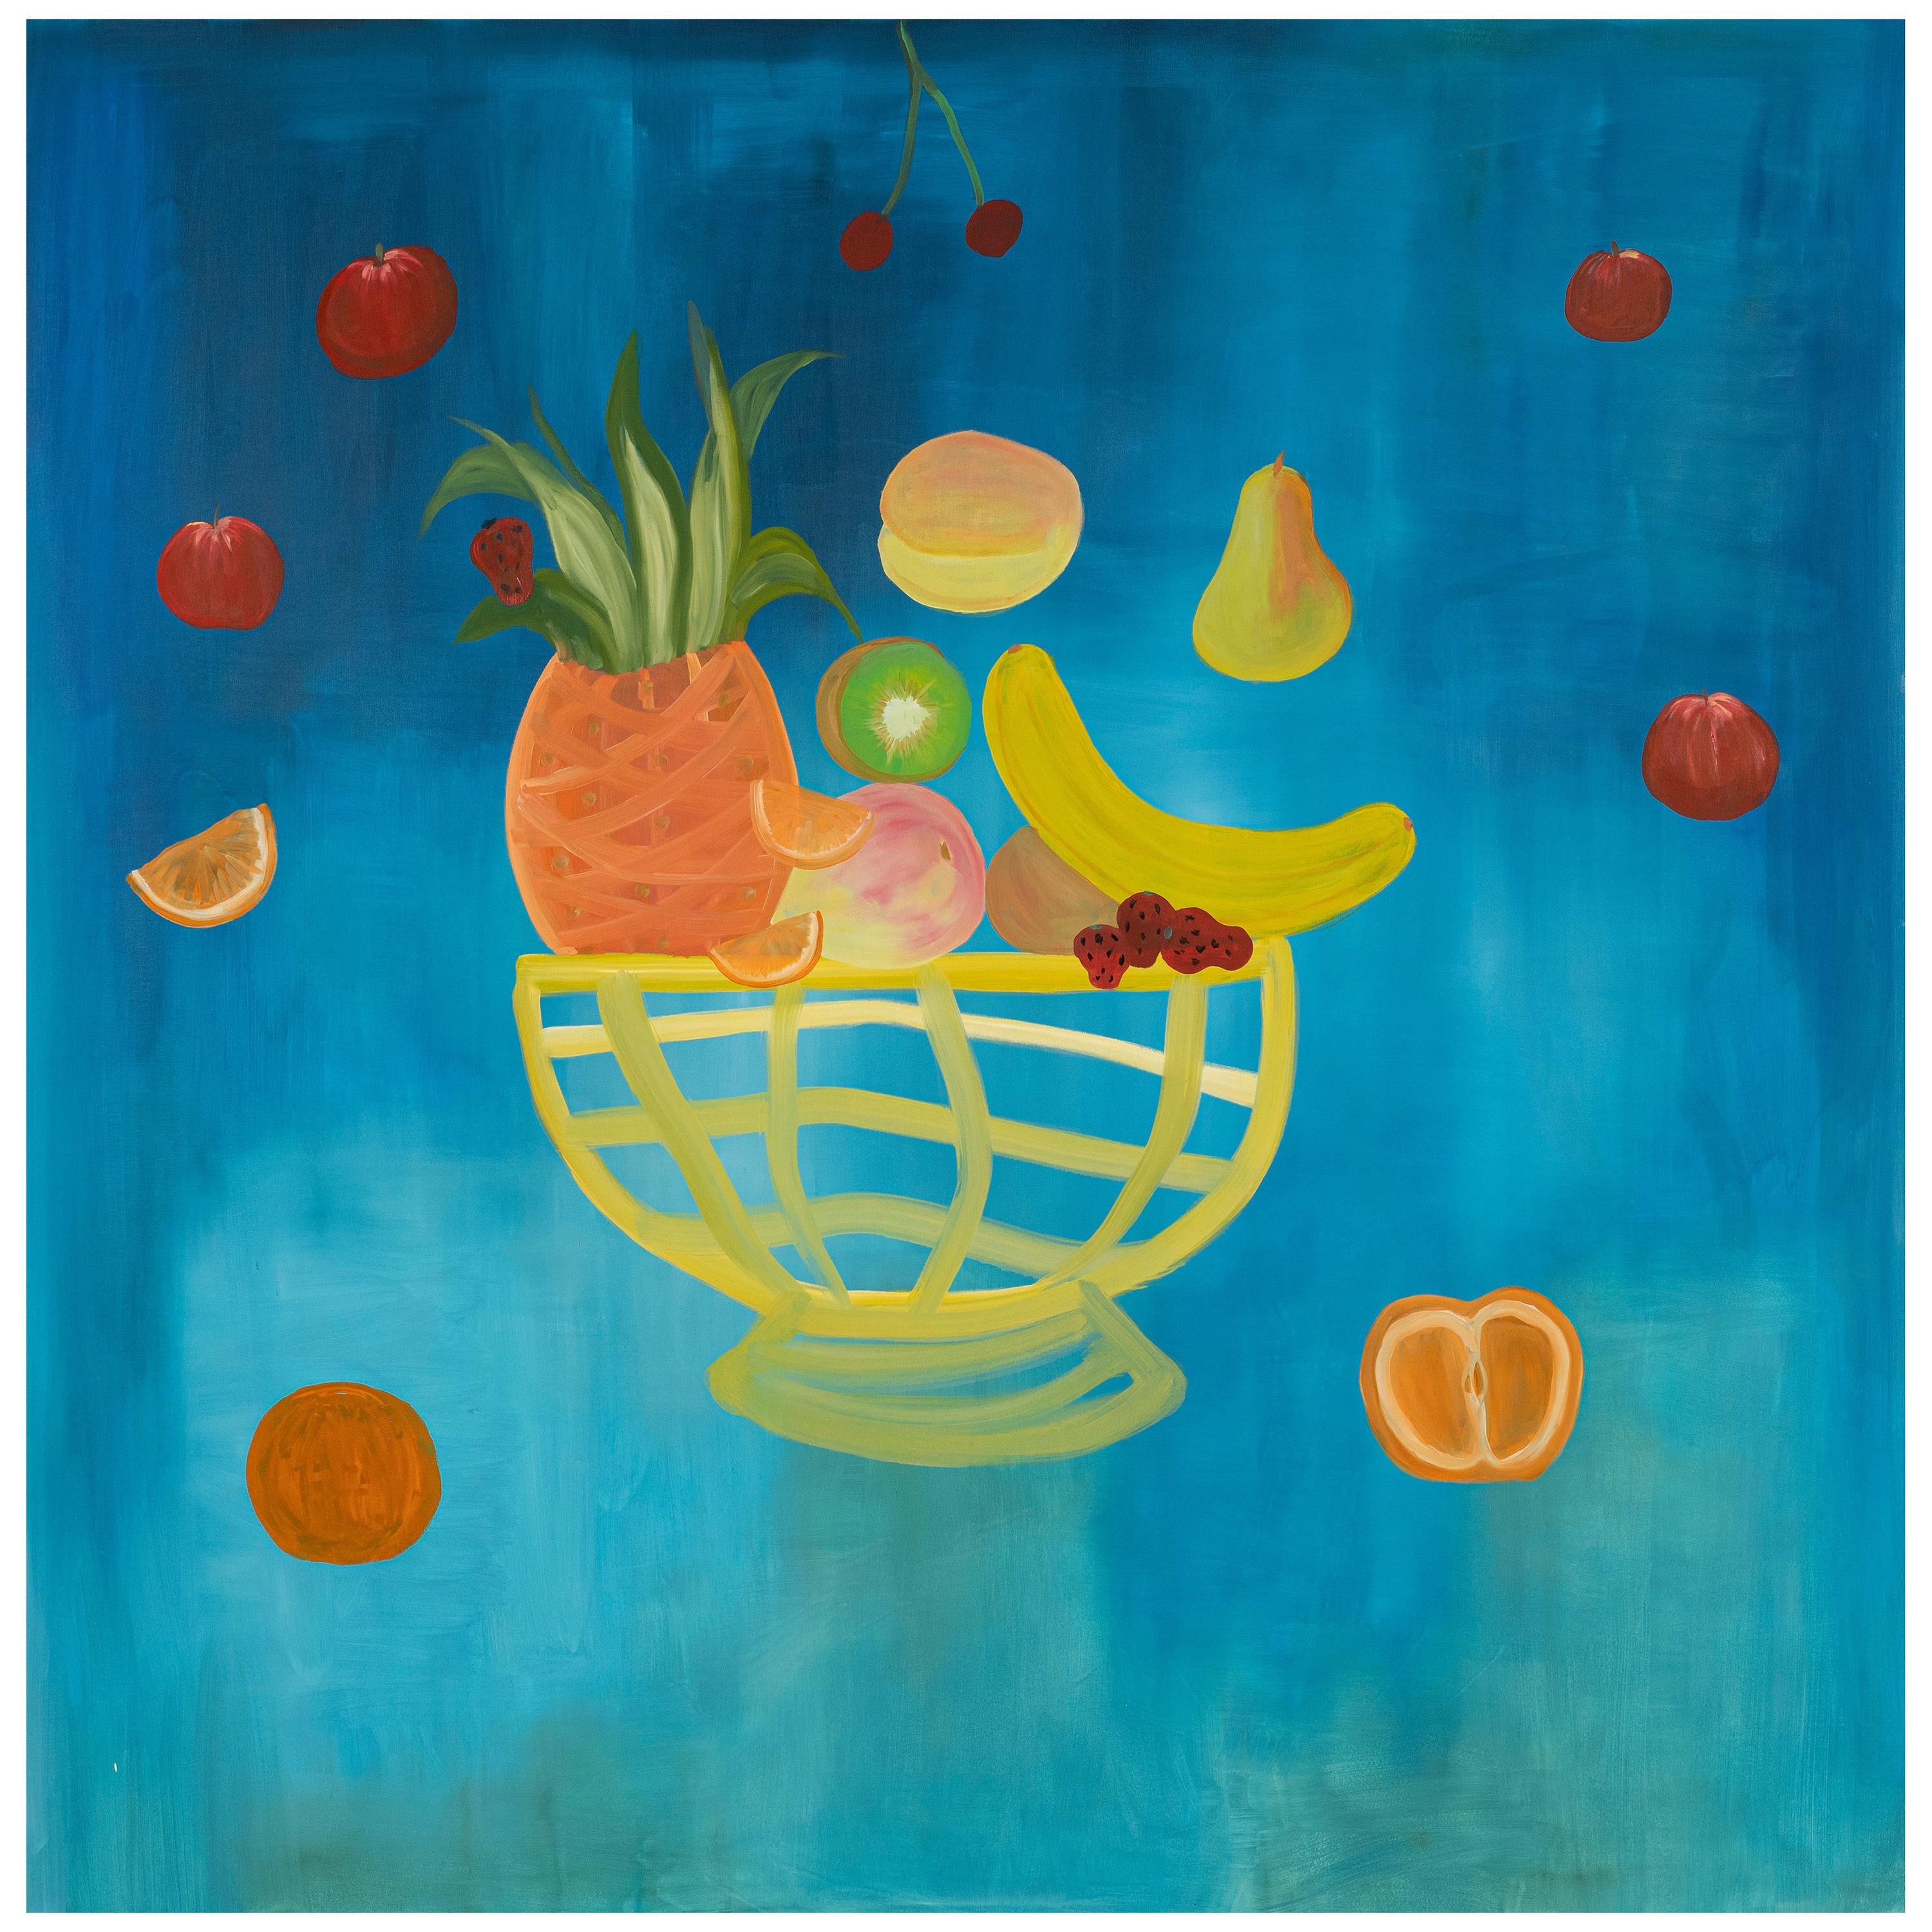 Oil on Canvas Painting, "Los planetas frutales" by Paola Vega, Argentina, 2020